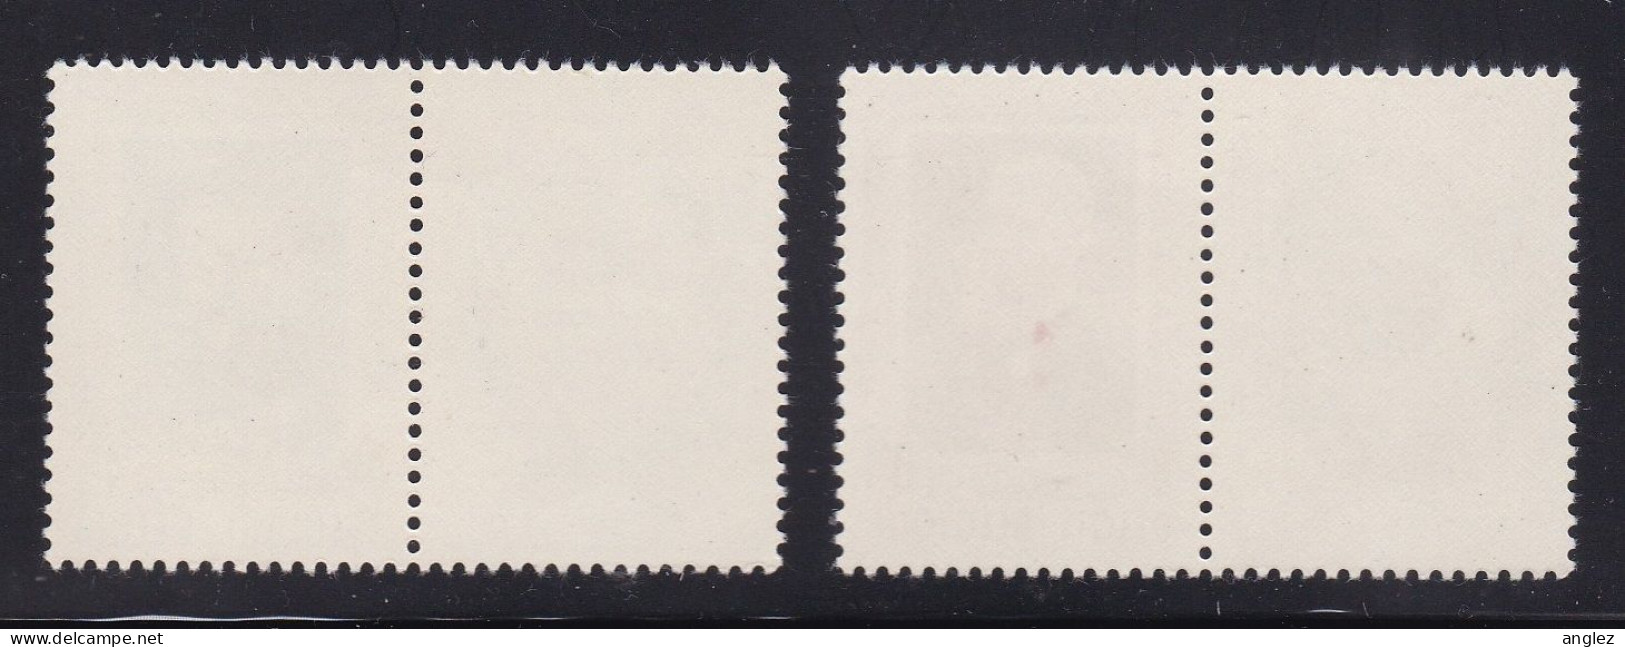 Belgium - 1952 Authors / Writers Subscription Issue 2v With Labels MNH - Ongebruikt